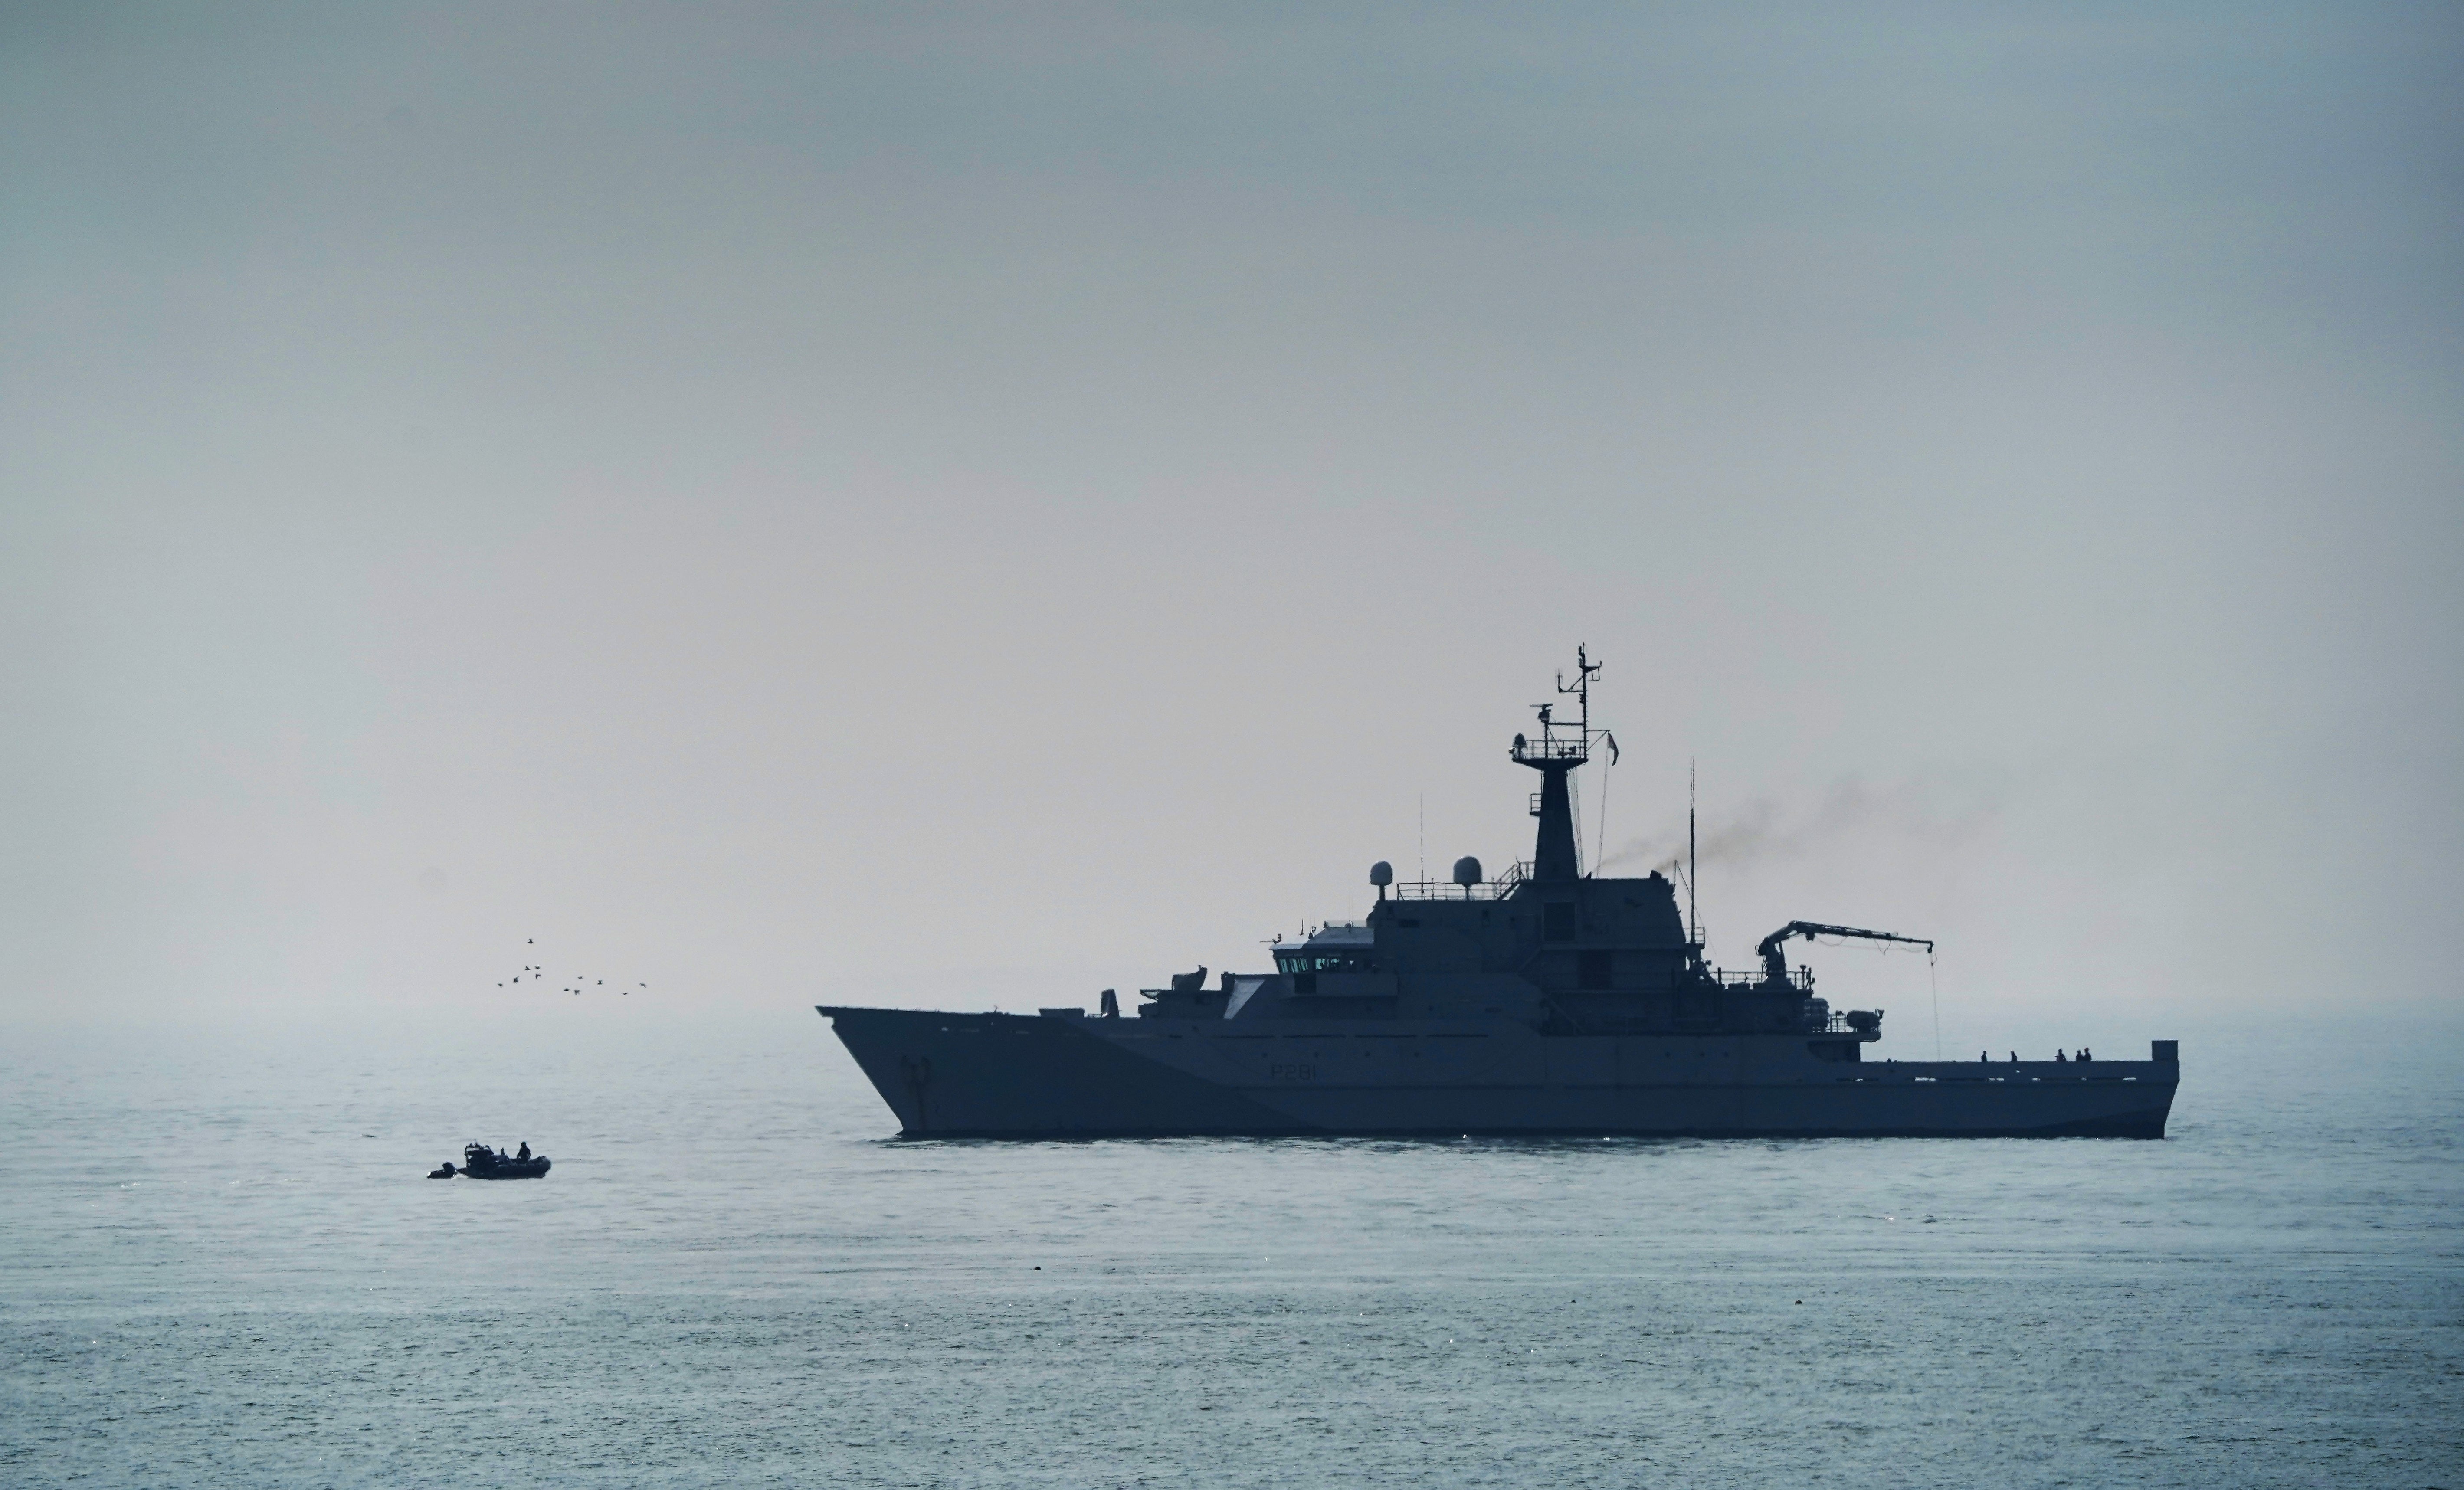 Royal Navy patrol ship ‘HMS Tyne’ on patrol in the Channel off the coast of Dover in April 2022